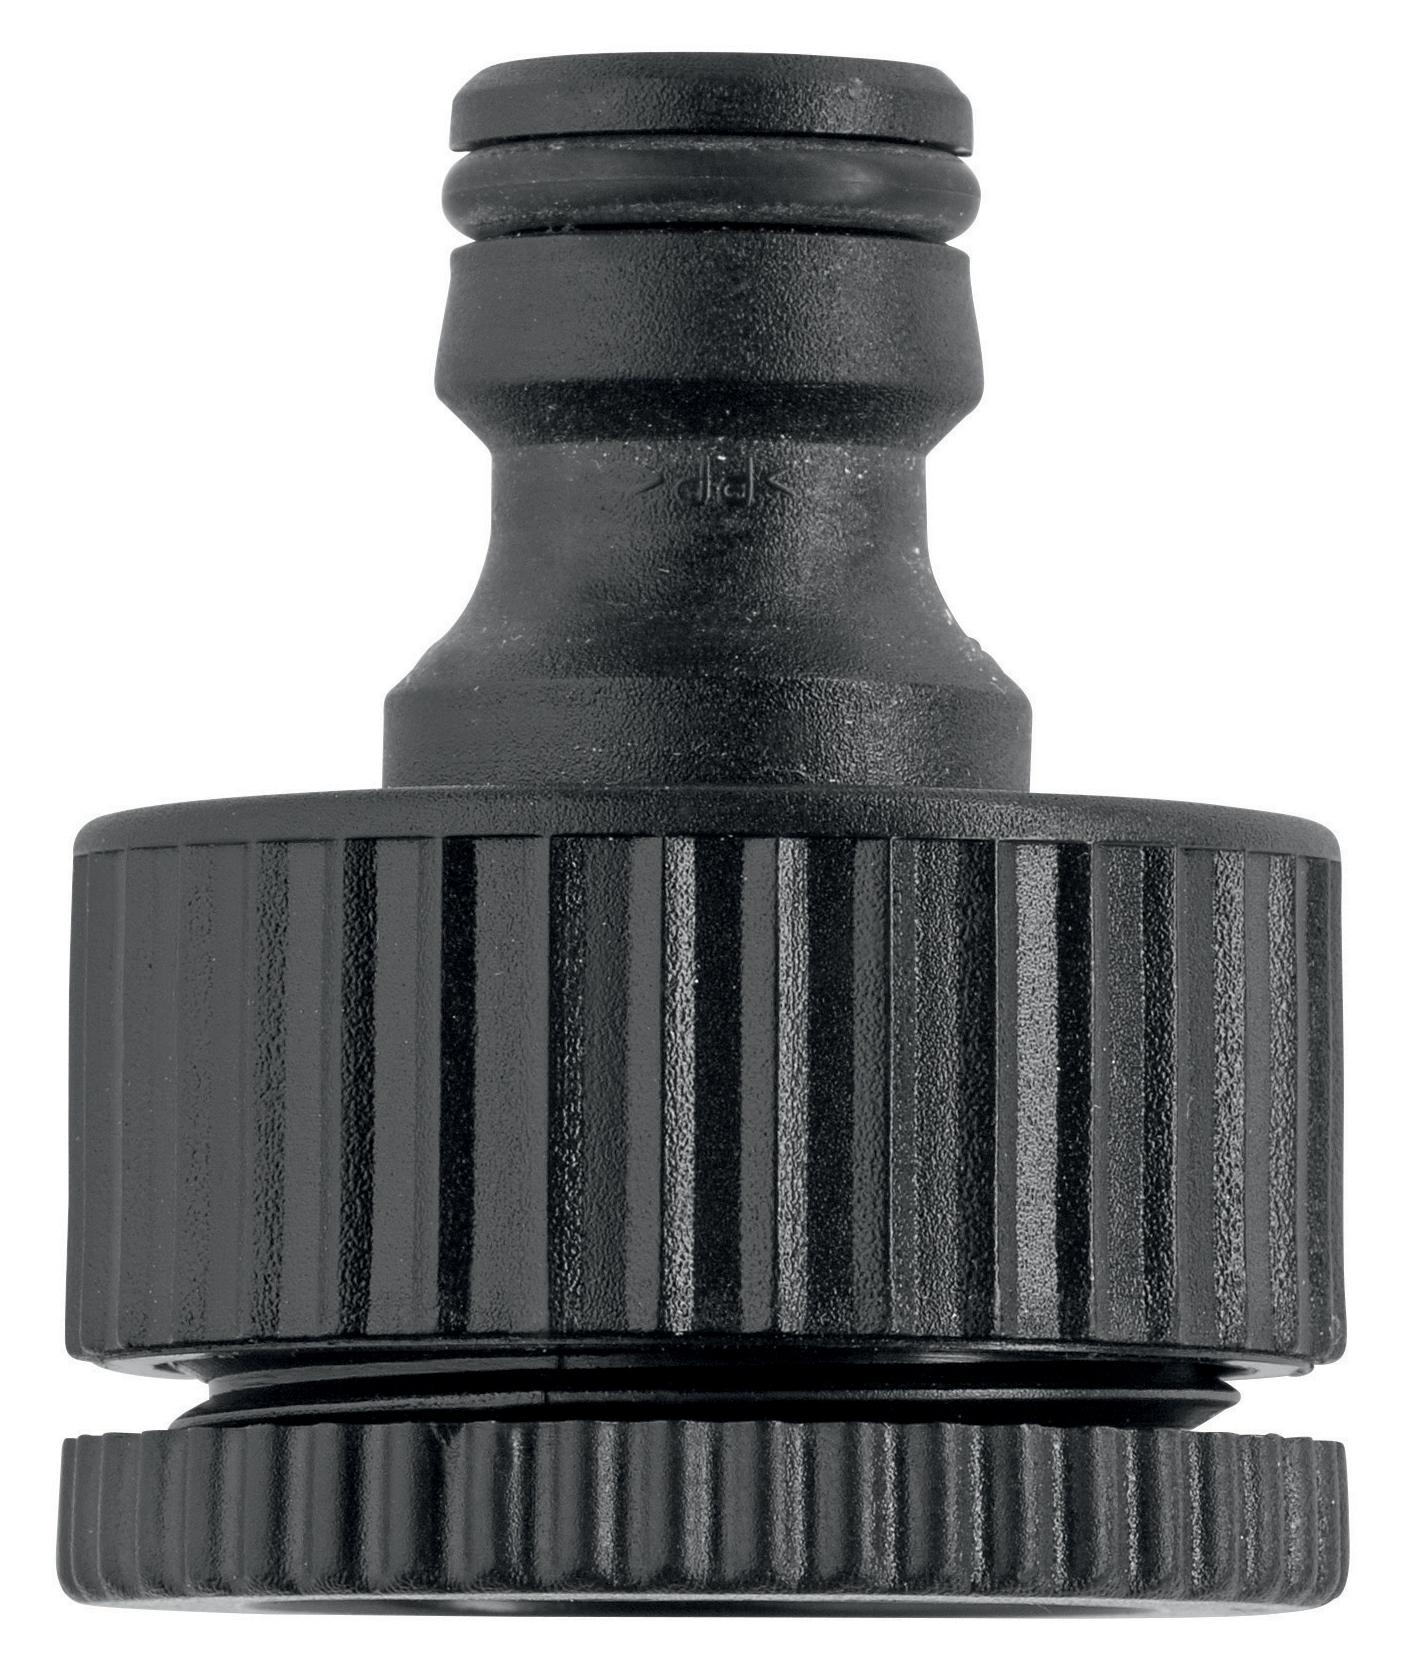 Karcher Tap Connector 3/4 Inch Thread With 1/2 Inch Thread Reducer